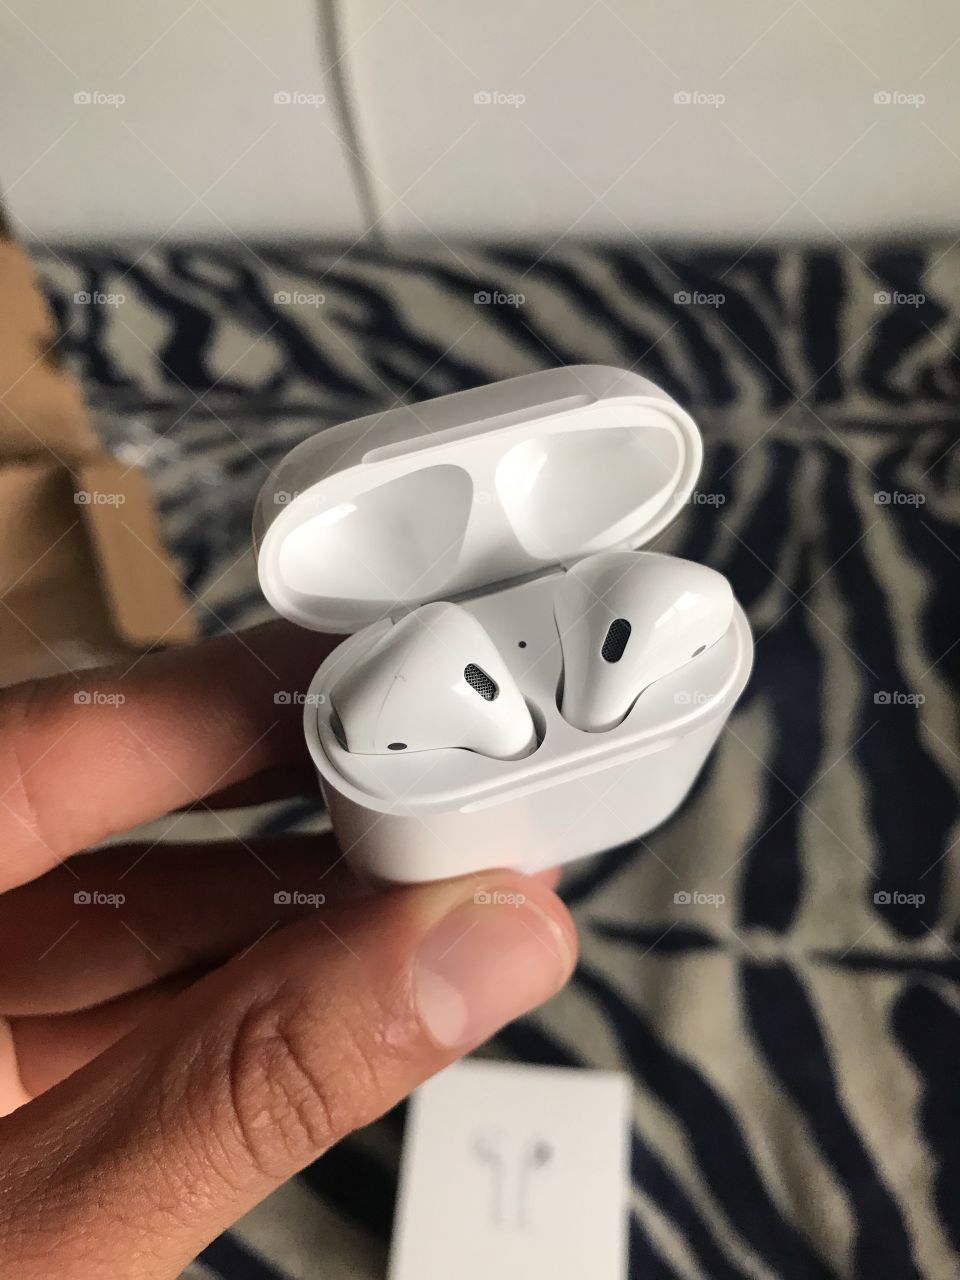 My new AirPods 